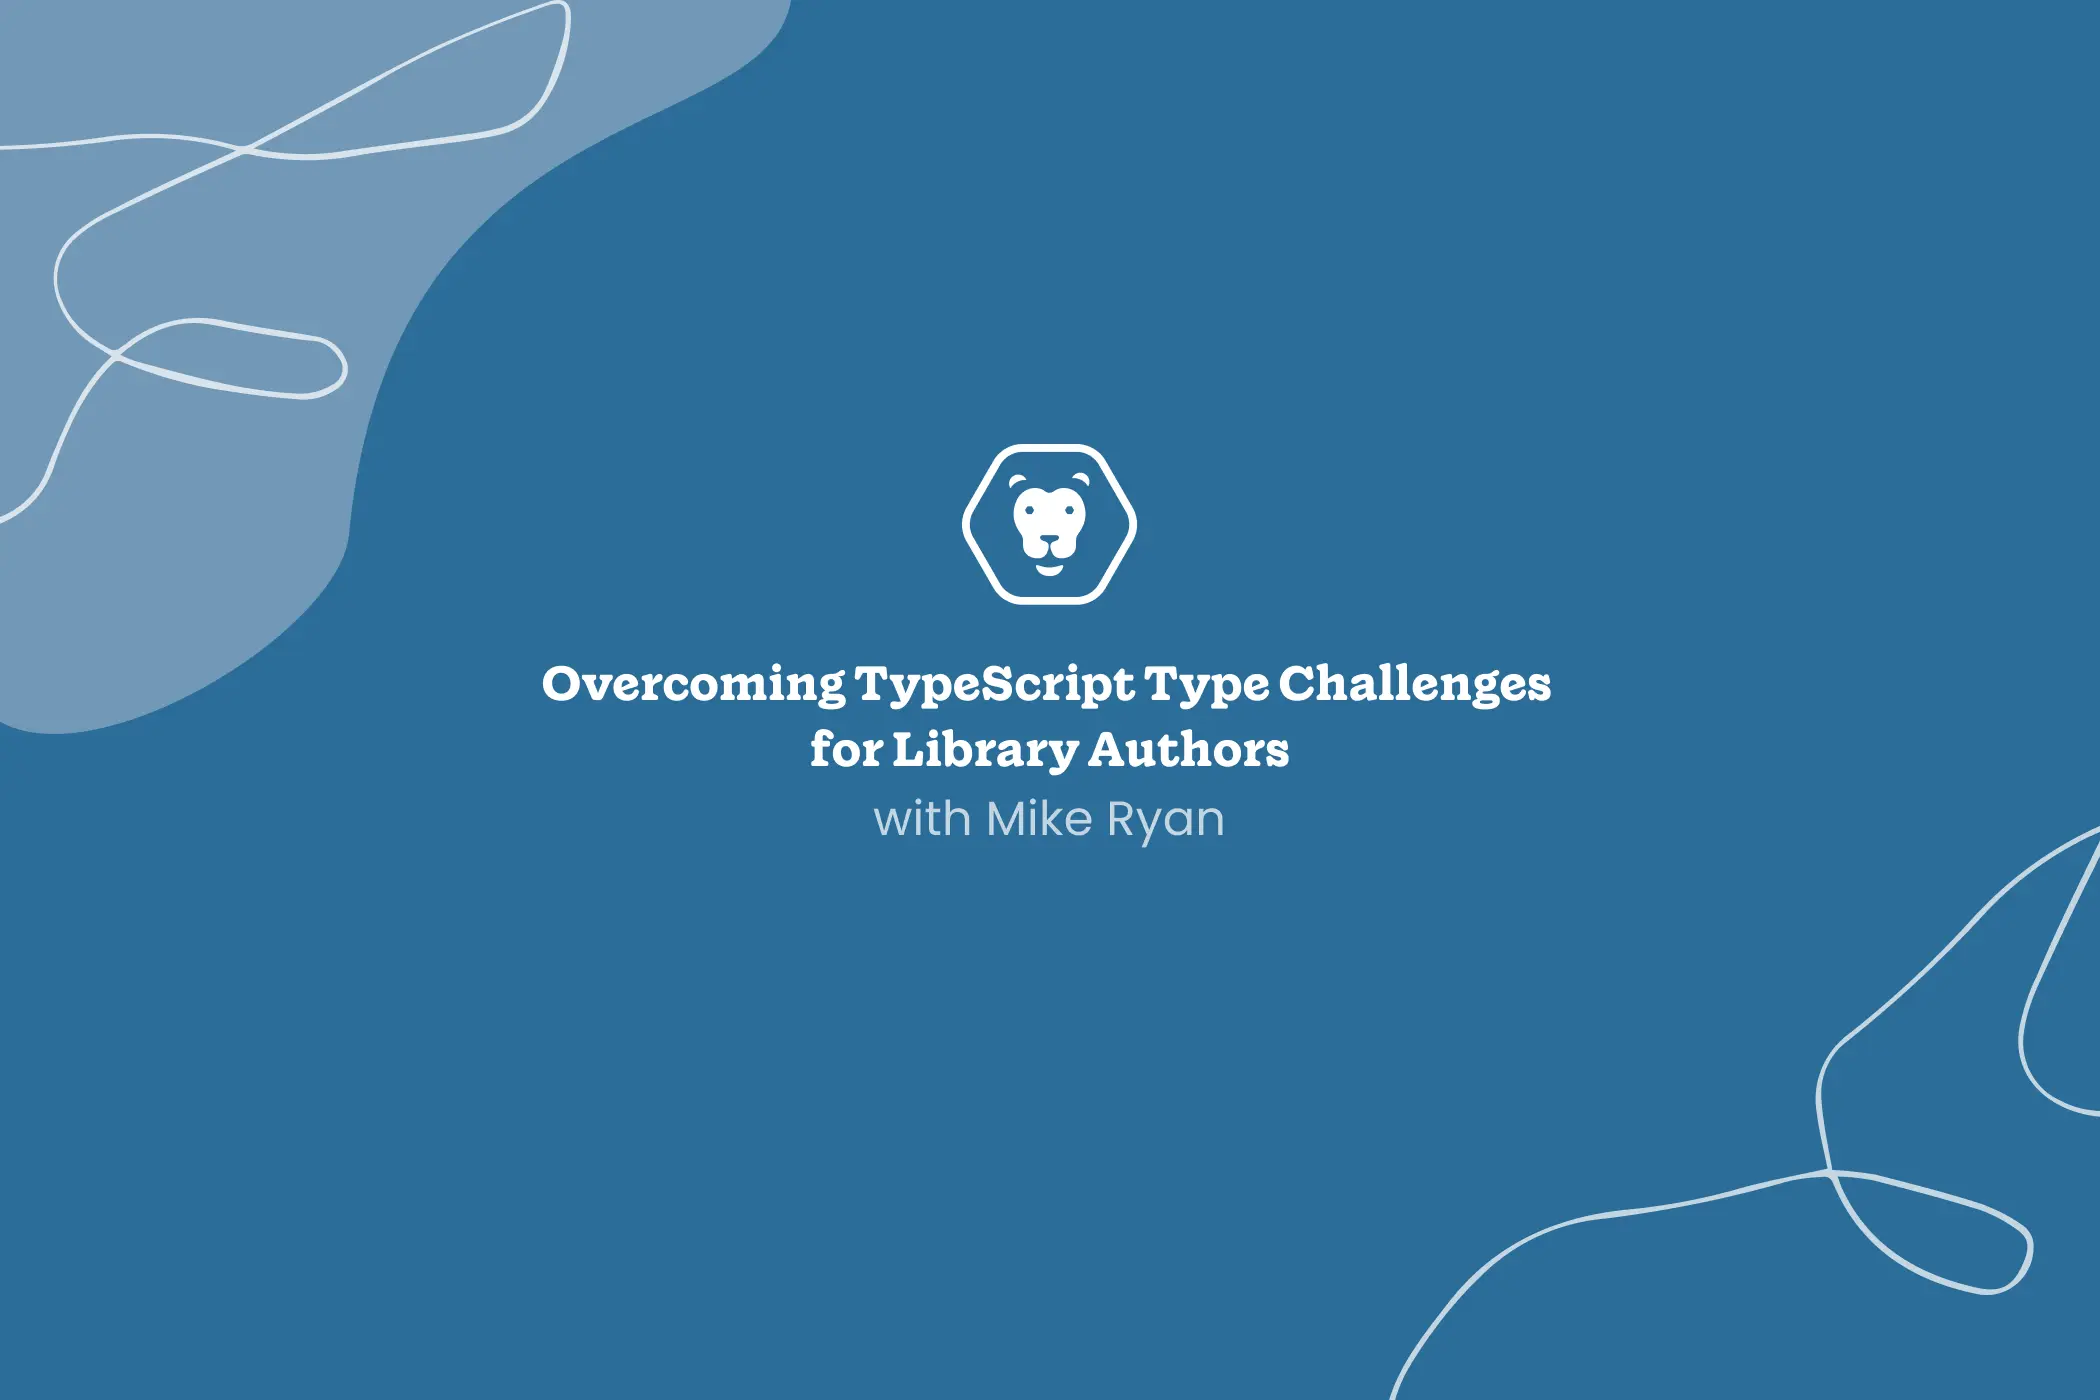 Overcoming TypeScript Type Challenges for Library Authors